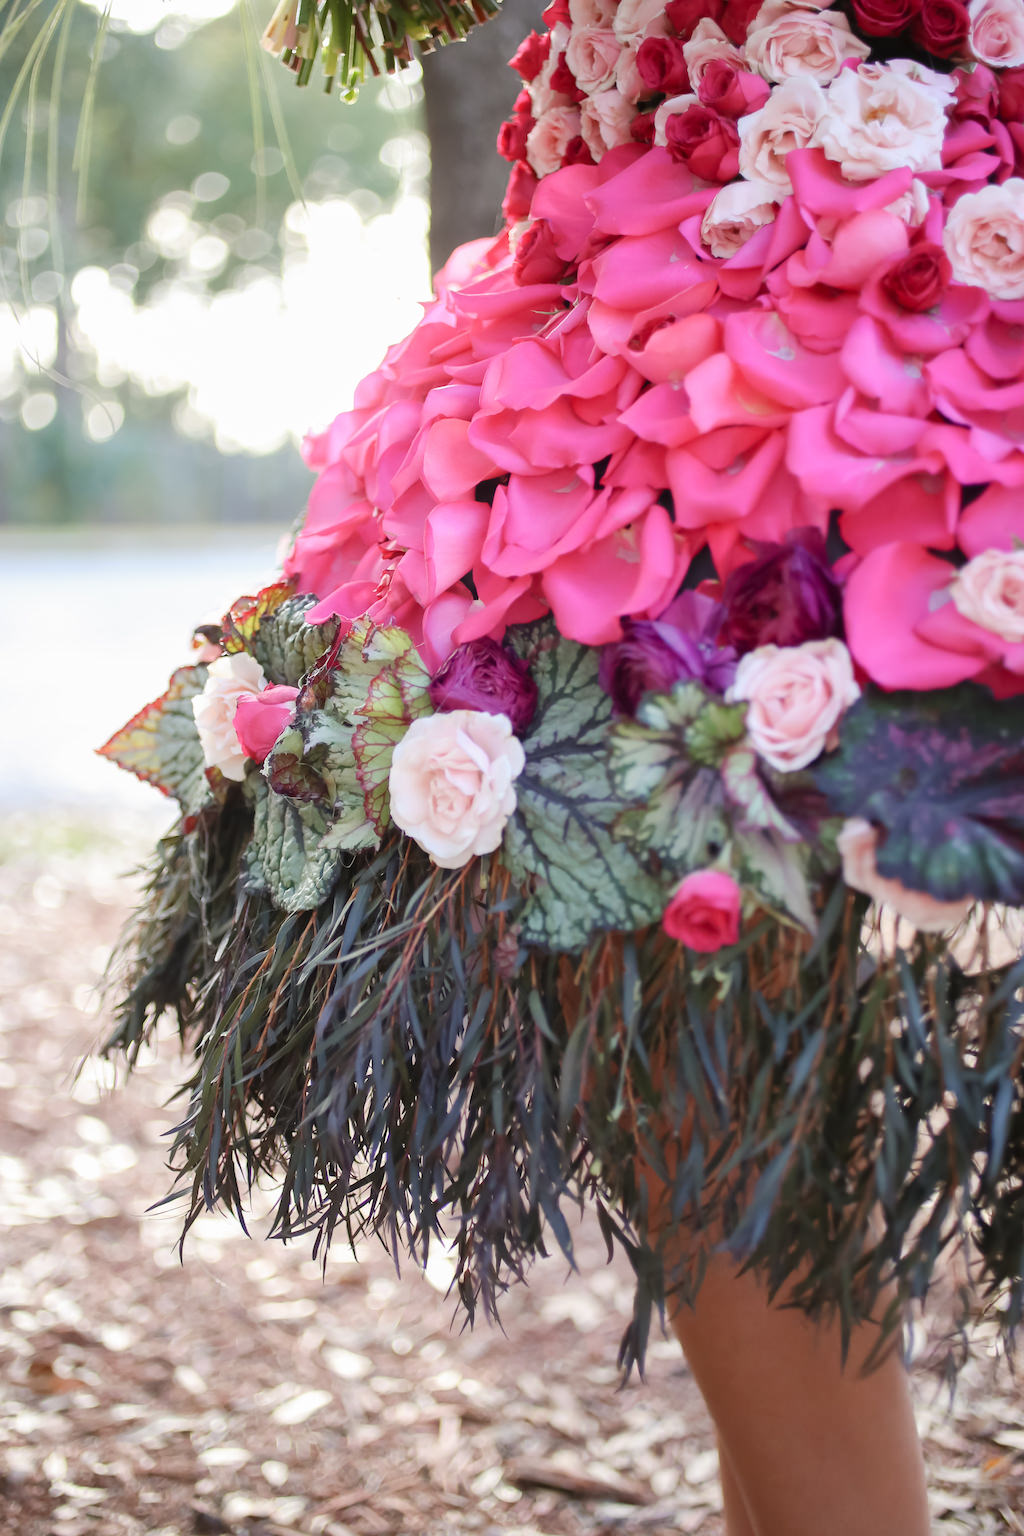 Outdoor Bridal Portrait in Creative Flower Dress with Pink, Fuchsia, Purple, Red and White Florals with Greenery | Tampa Wedding Florist Gabro Event Services